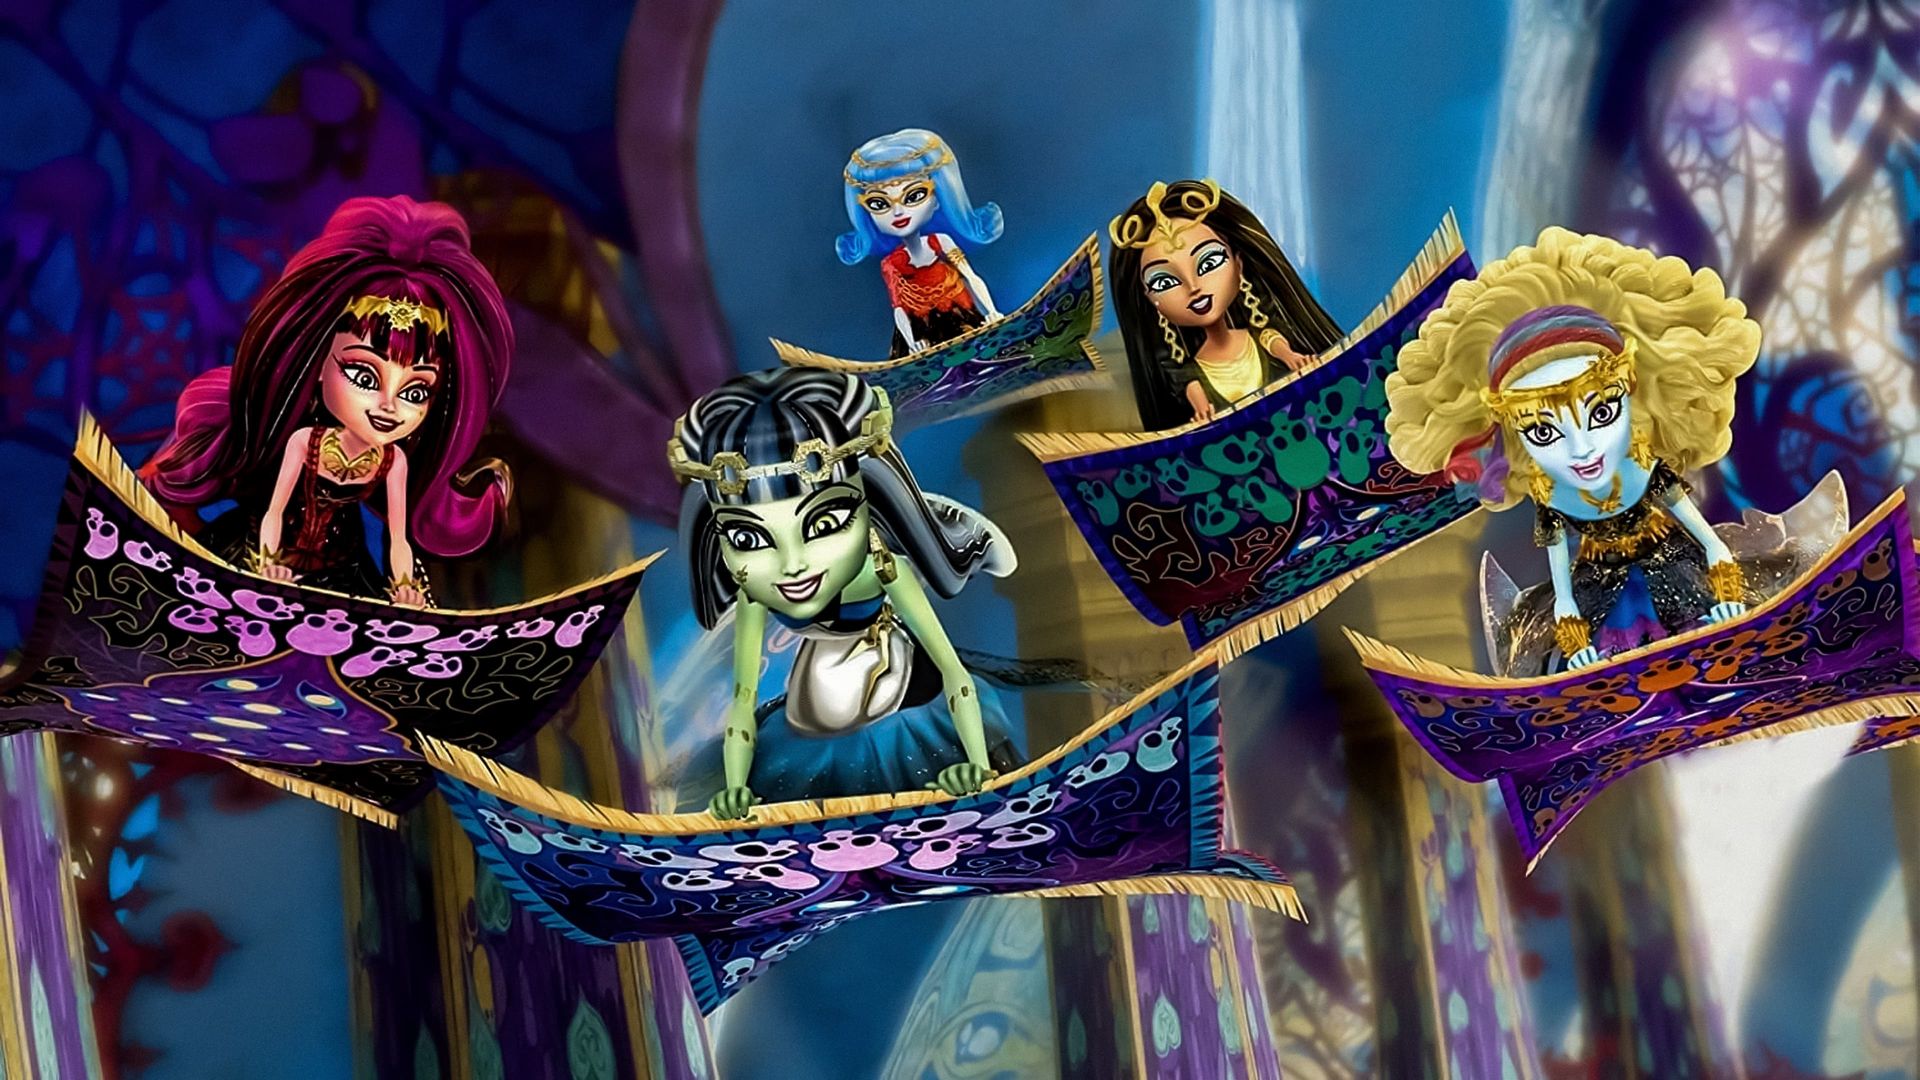 Monster High: 13 Wishes background